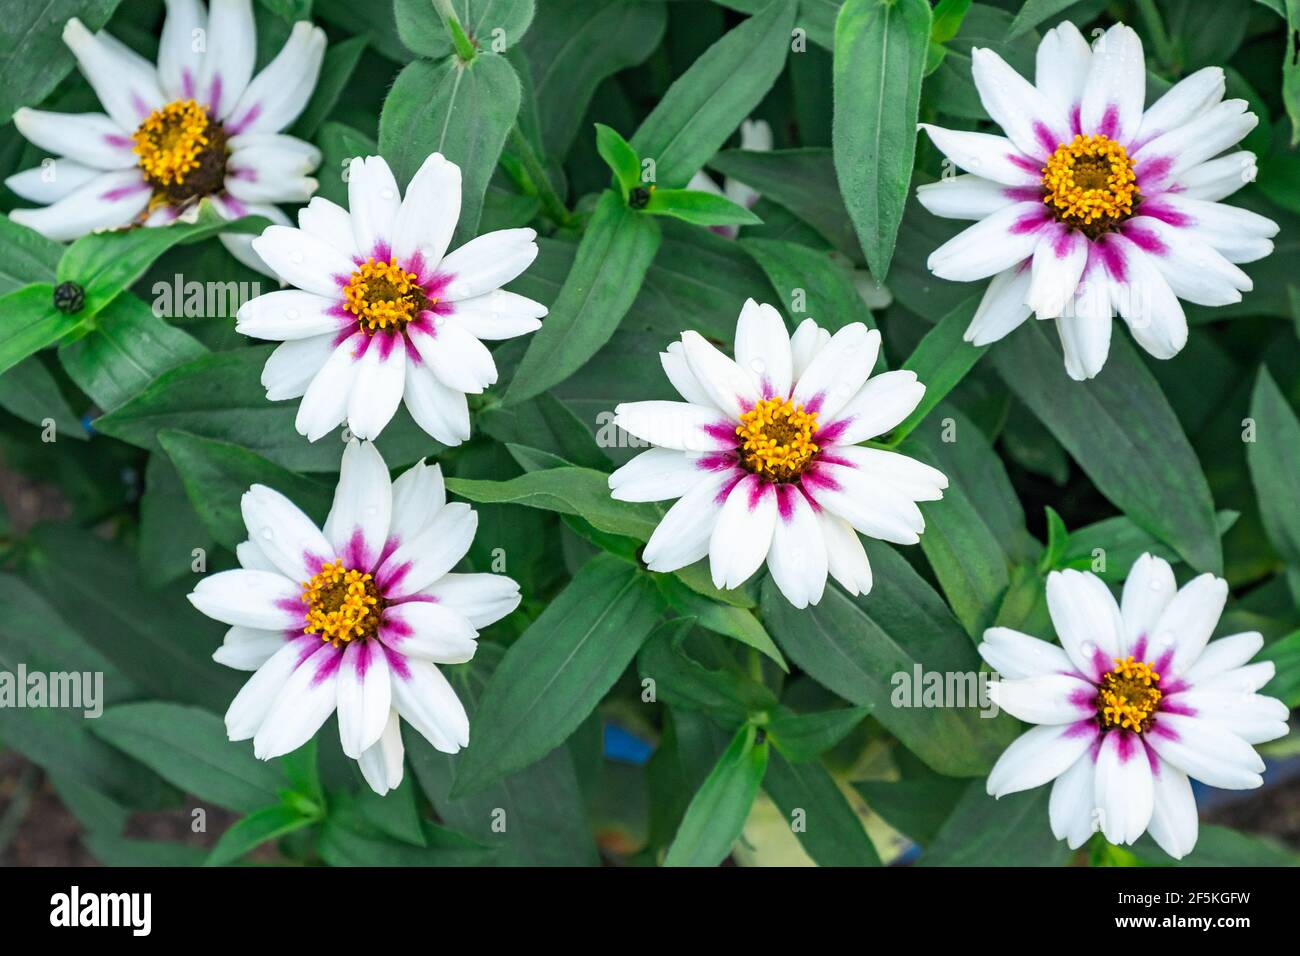 White flowers with a violet center osteospermum or dimorphoteka in a flower bed, among lush greenery. Garden flowers known as African daisies. Stock Photo